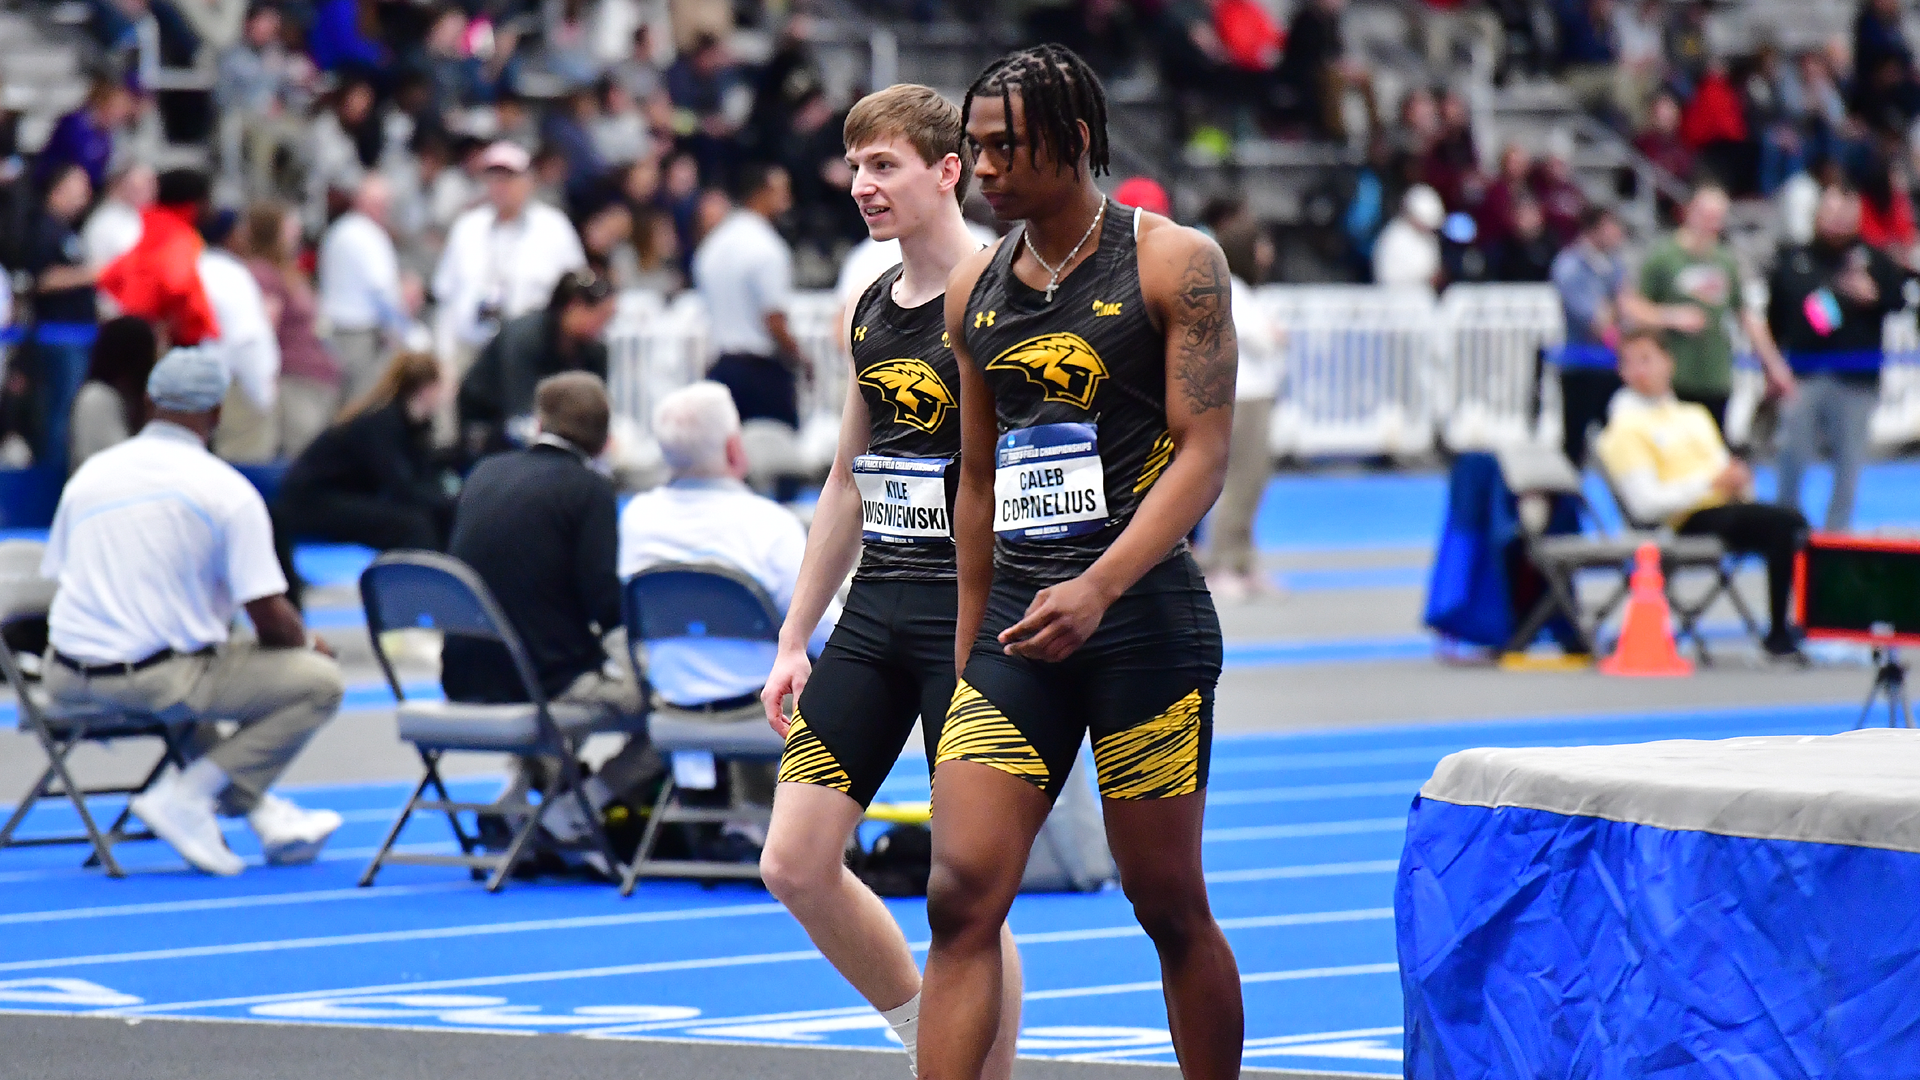 Kyle Wisniewski (left) and Caleb Cornelius (right) each cleared the high jump at 2.04 meters for third place. Photo Credit: Keith Lucas, Sideline Media Productions